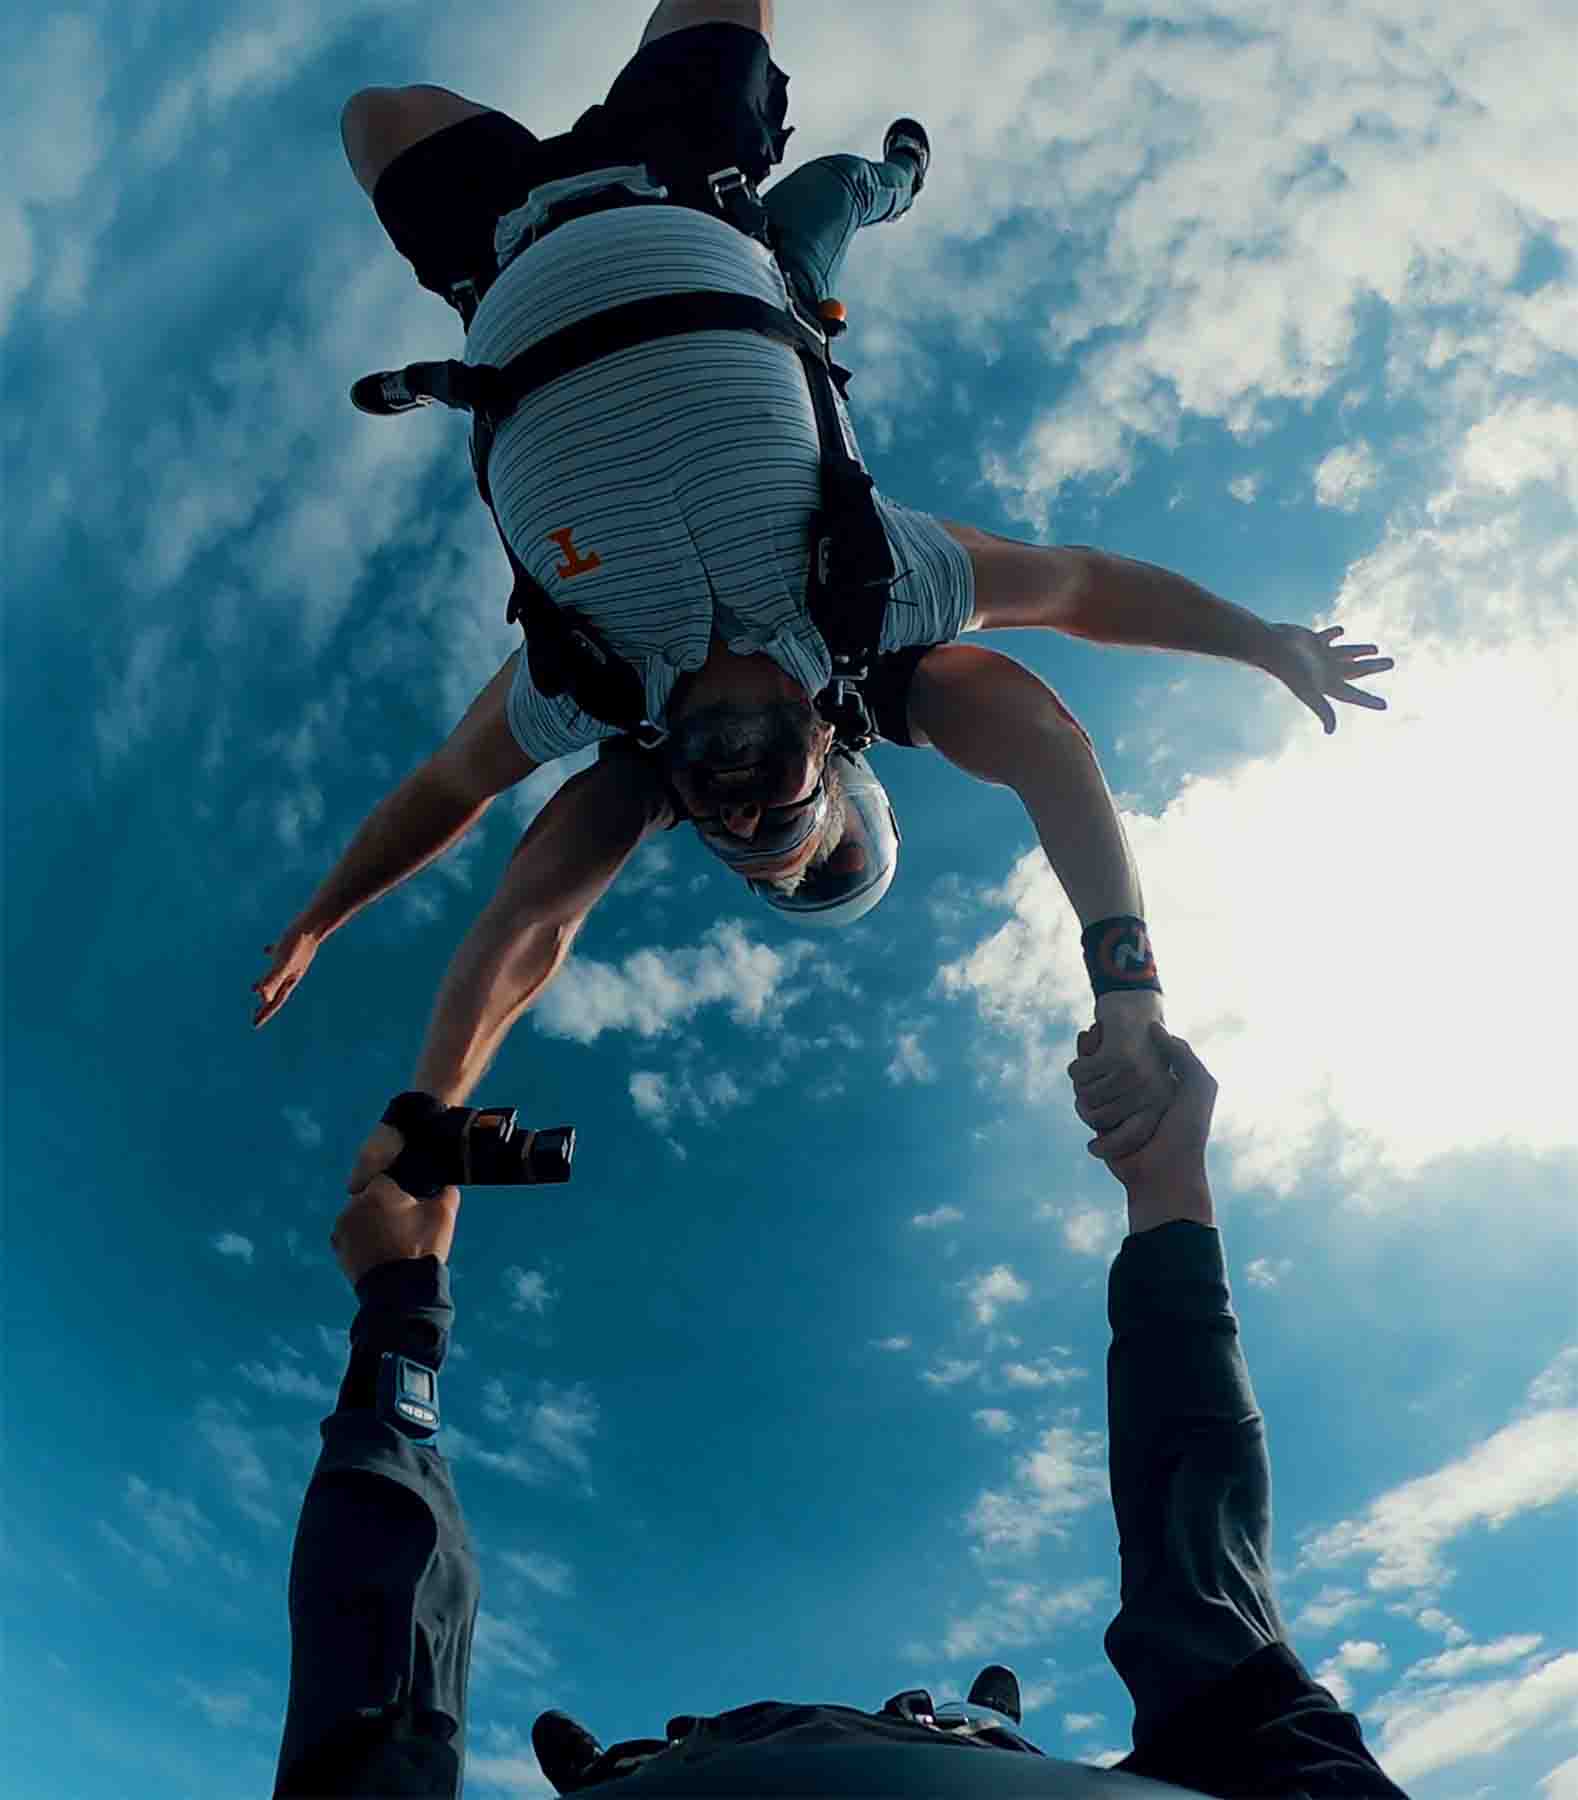 Chattanooga Skydiving The Tradition Continues Explore Chattanooga